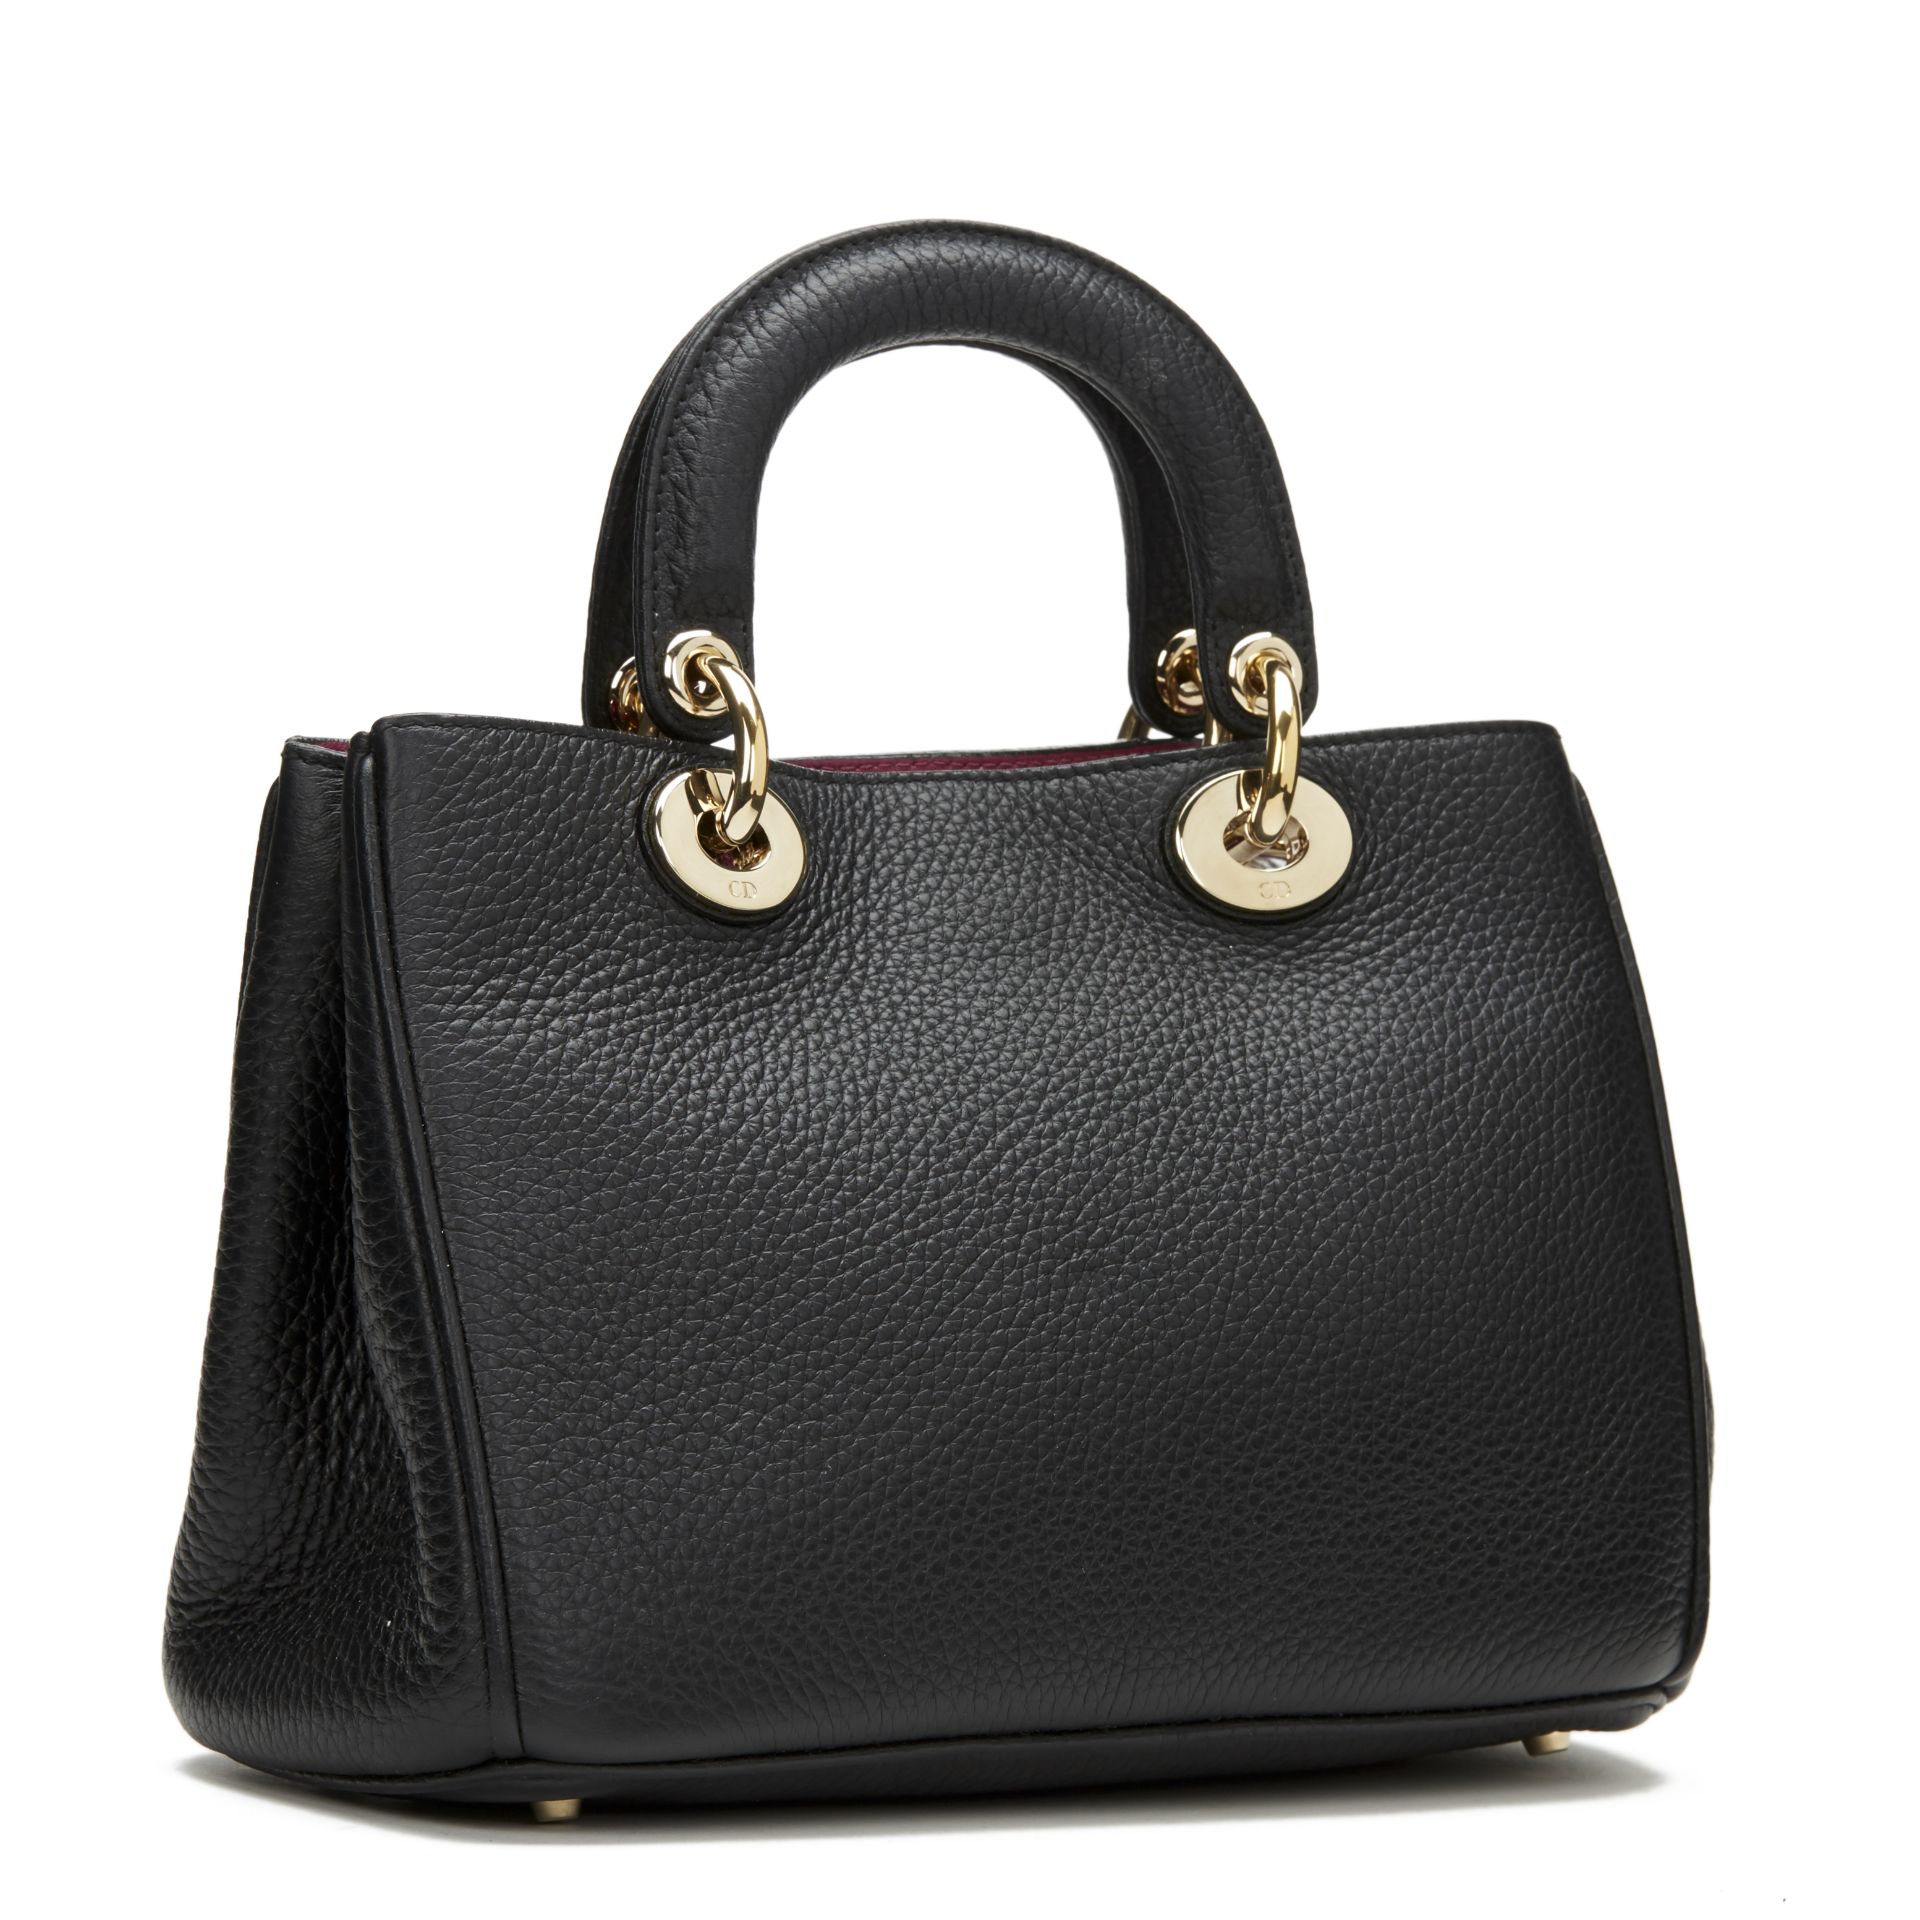 Christian Dior Black Grained Calfskin Leather Small Diorissimo - Image 2 of 9